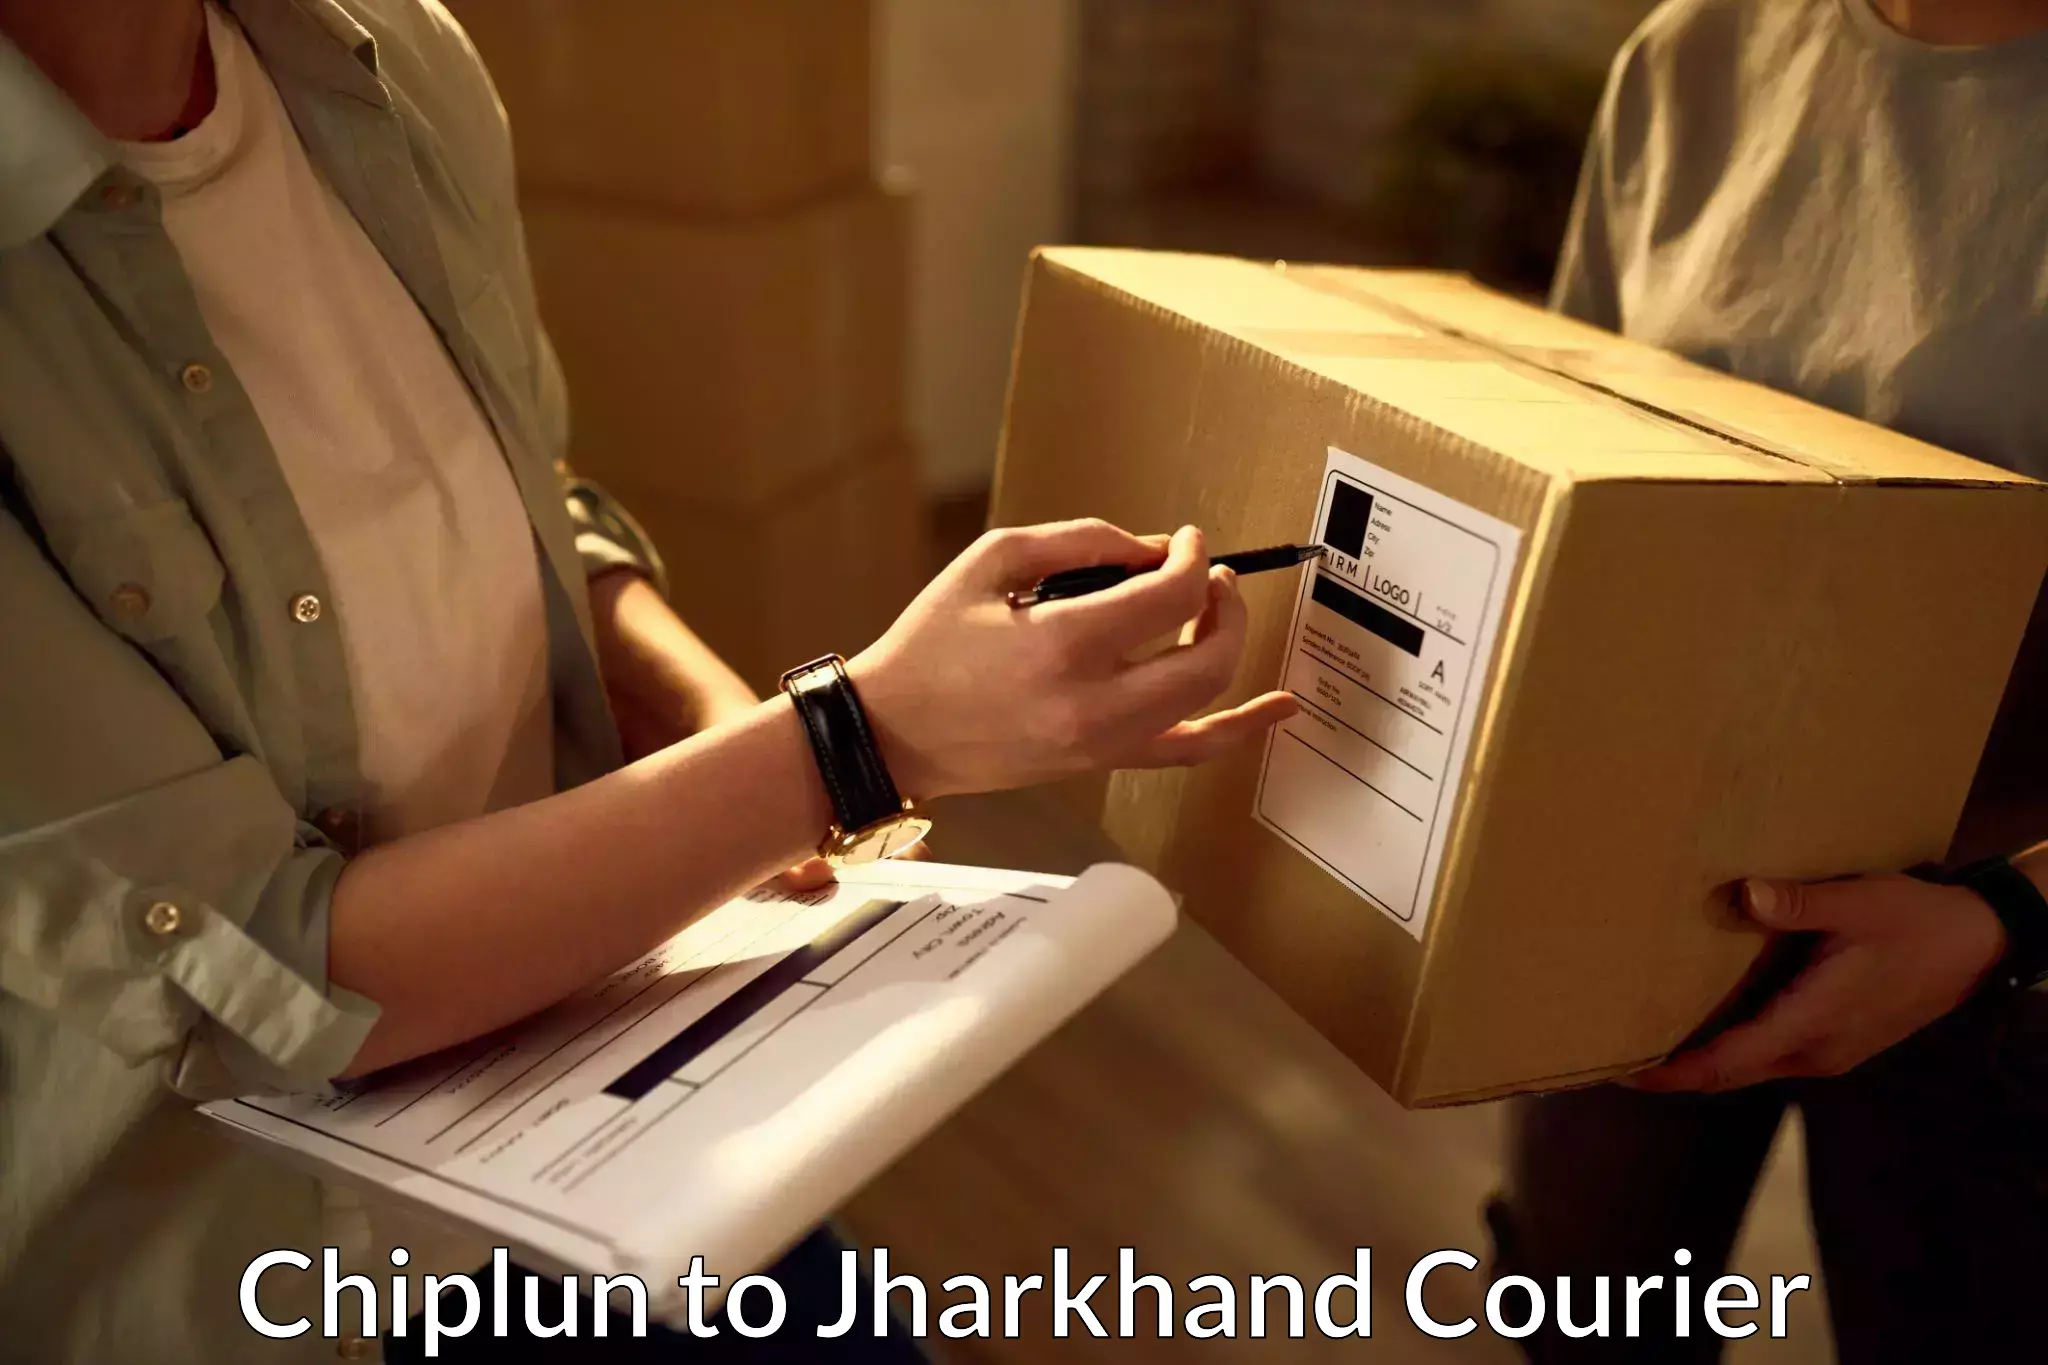 On-call courier service Chiplun to Jamshedpur